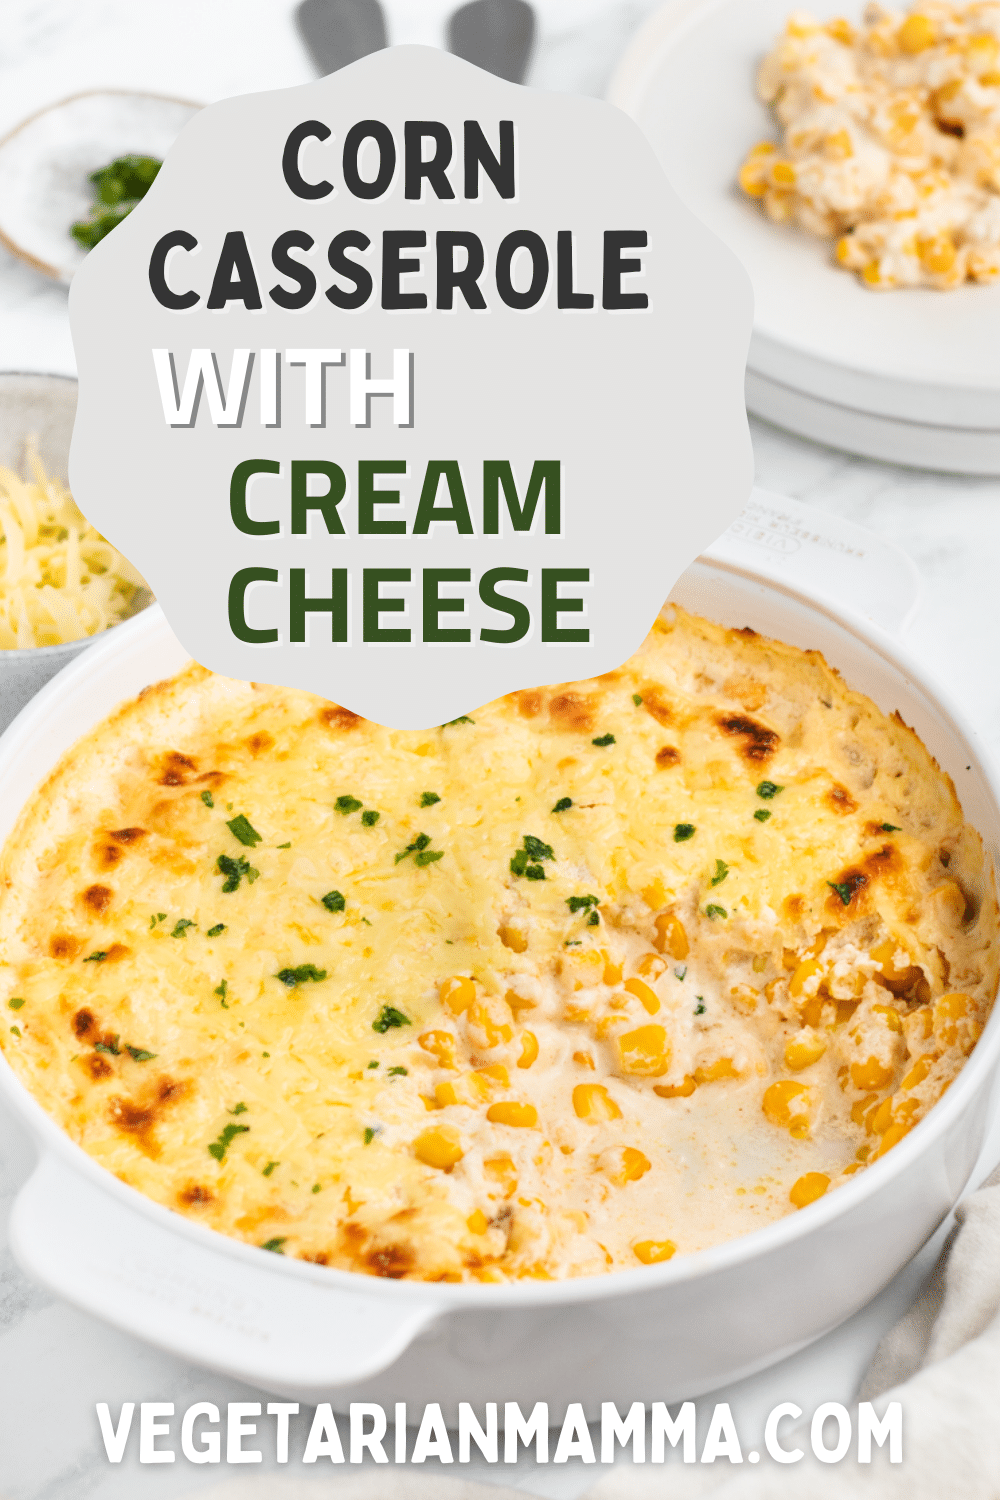 Frozen corn, cream cheese, and a handful of other simple ingredients come together to make the most delicious and easy Corn Casserole with Cream Cheese!